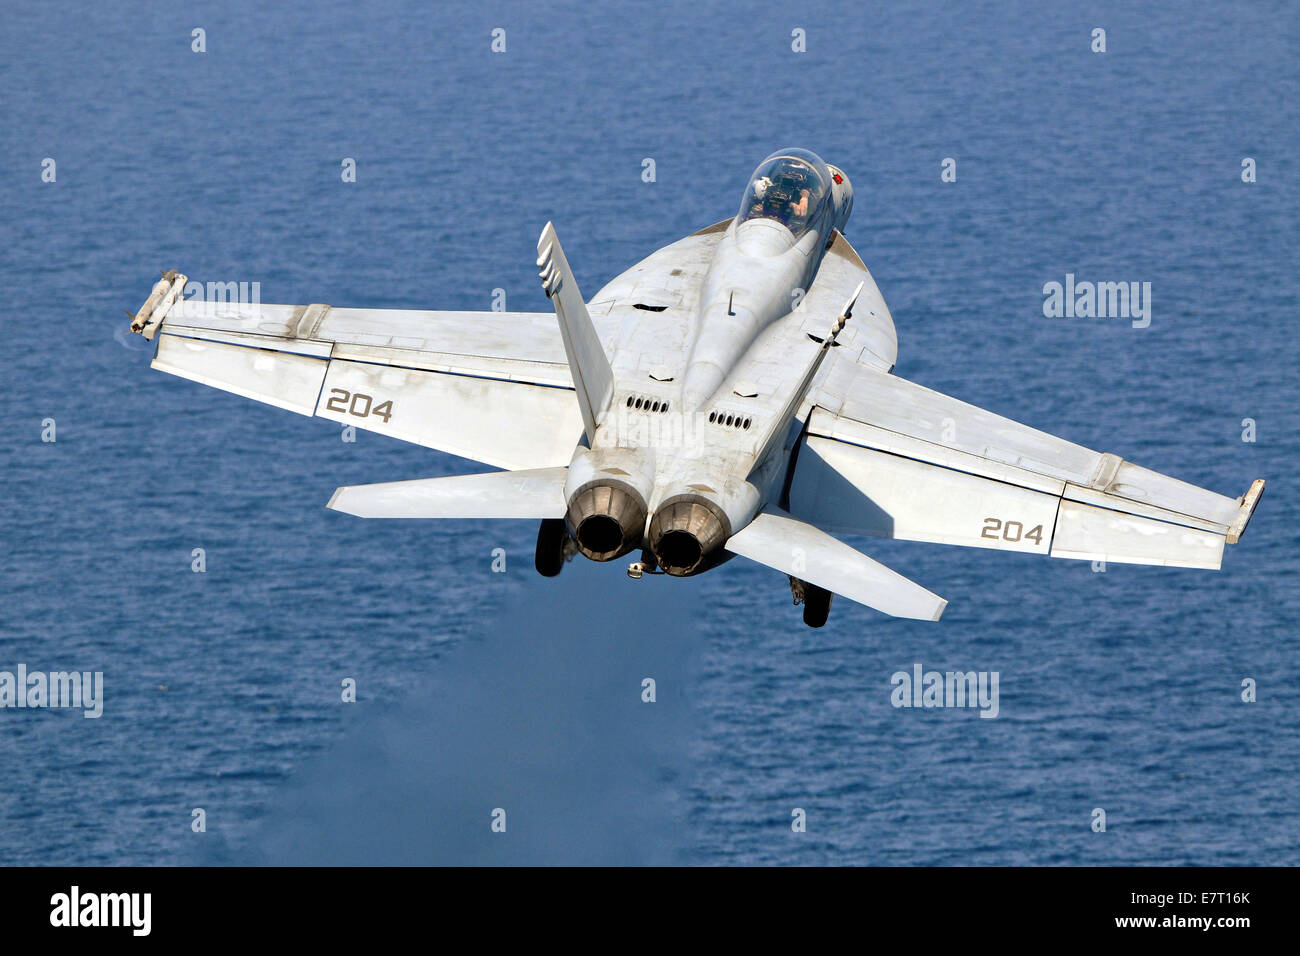 A US Navy F/A-18F Hornet fighter aircraft launches from the flight deck of the aircraft carrier USS George H.W. Bush September 22, 2014 in the Persian Gulf Sept. 22, 2014. The military launched the first direct strikes on ISIS targets inside Syria. Stock Photo